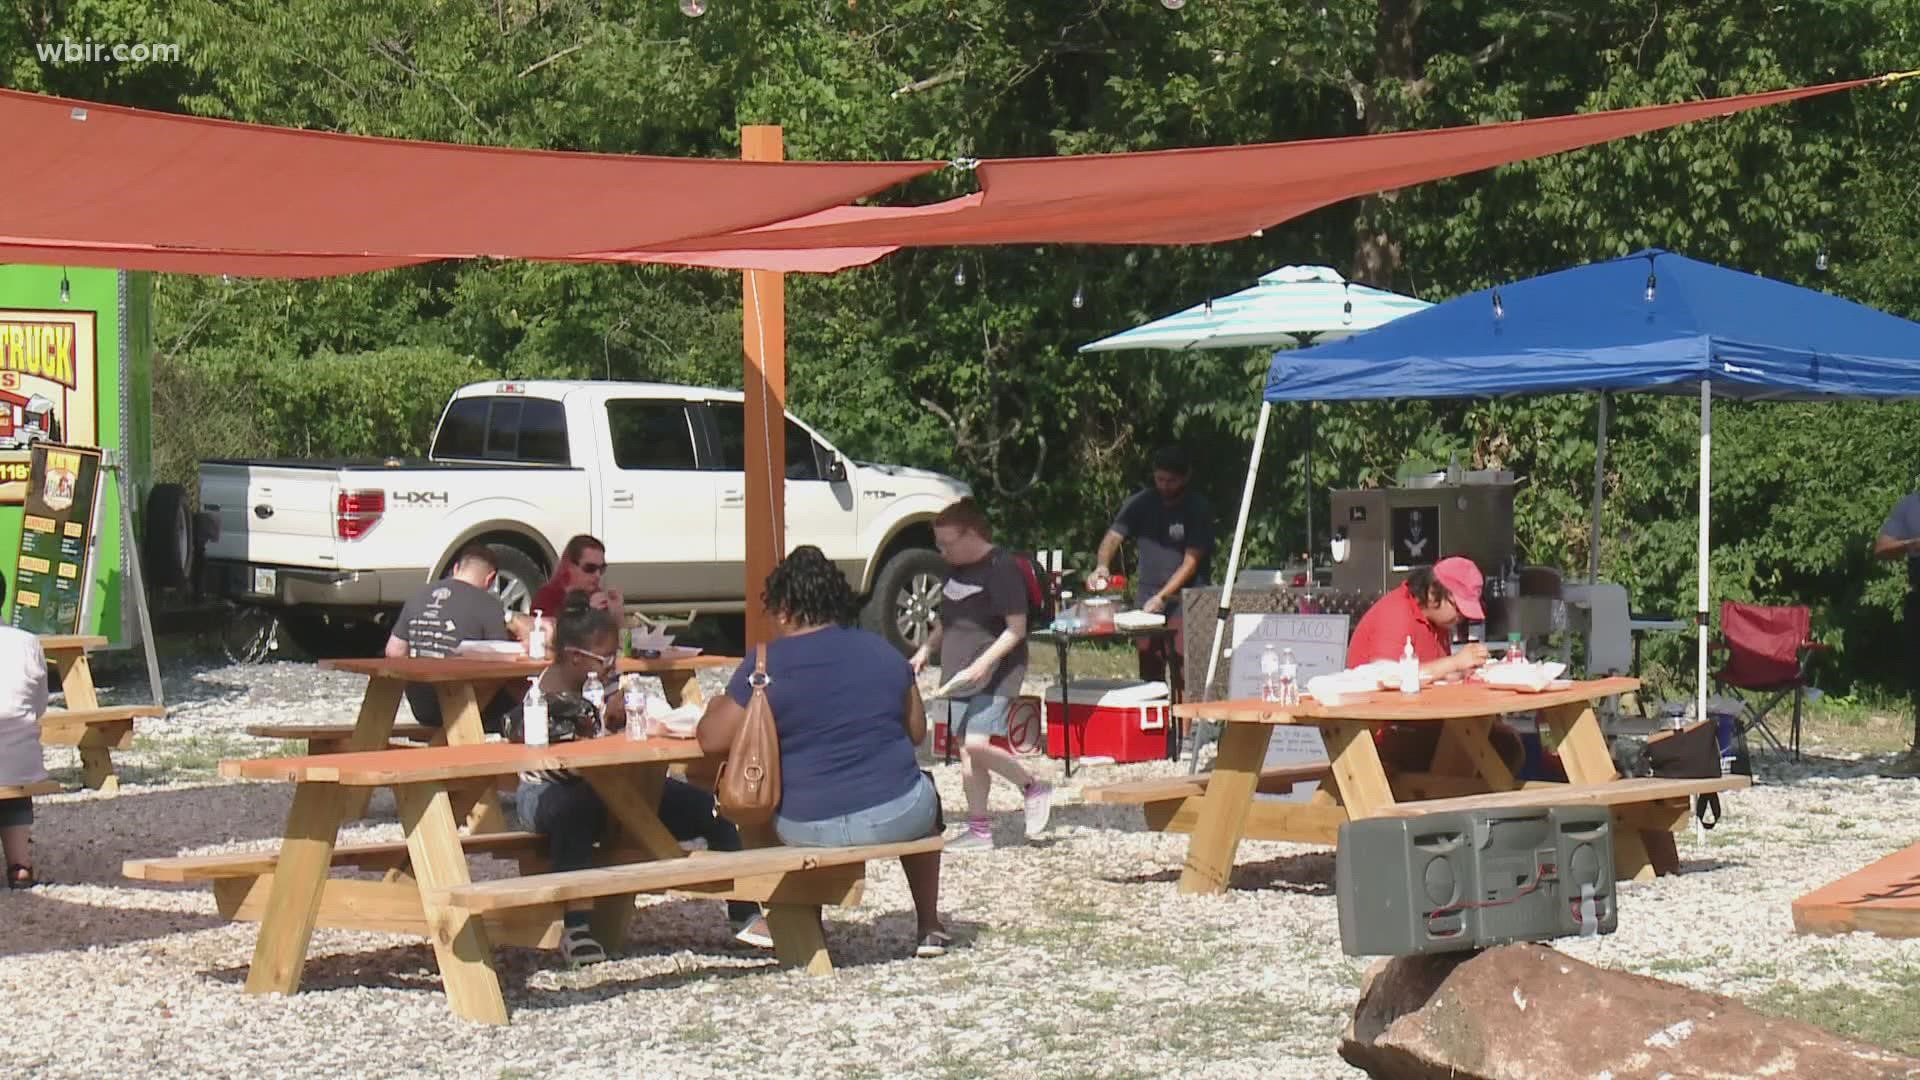 People filled into Powell Food Park on Thursday to enjoy some local food from trucks.